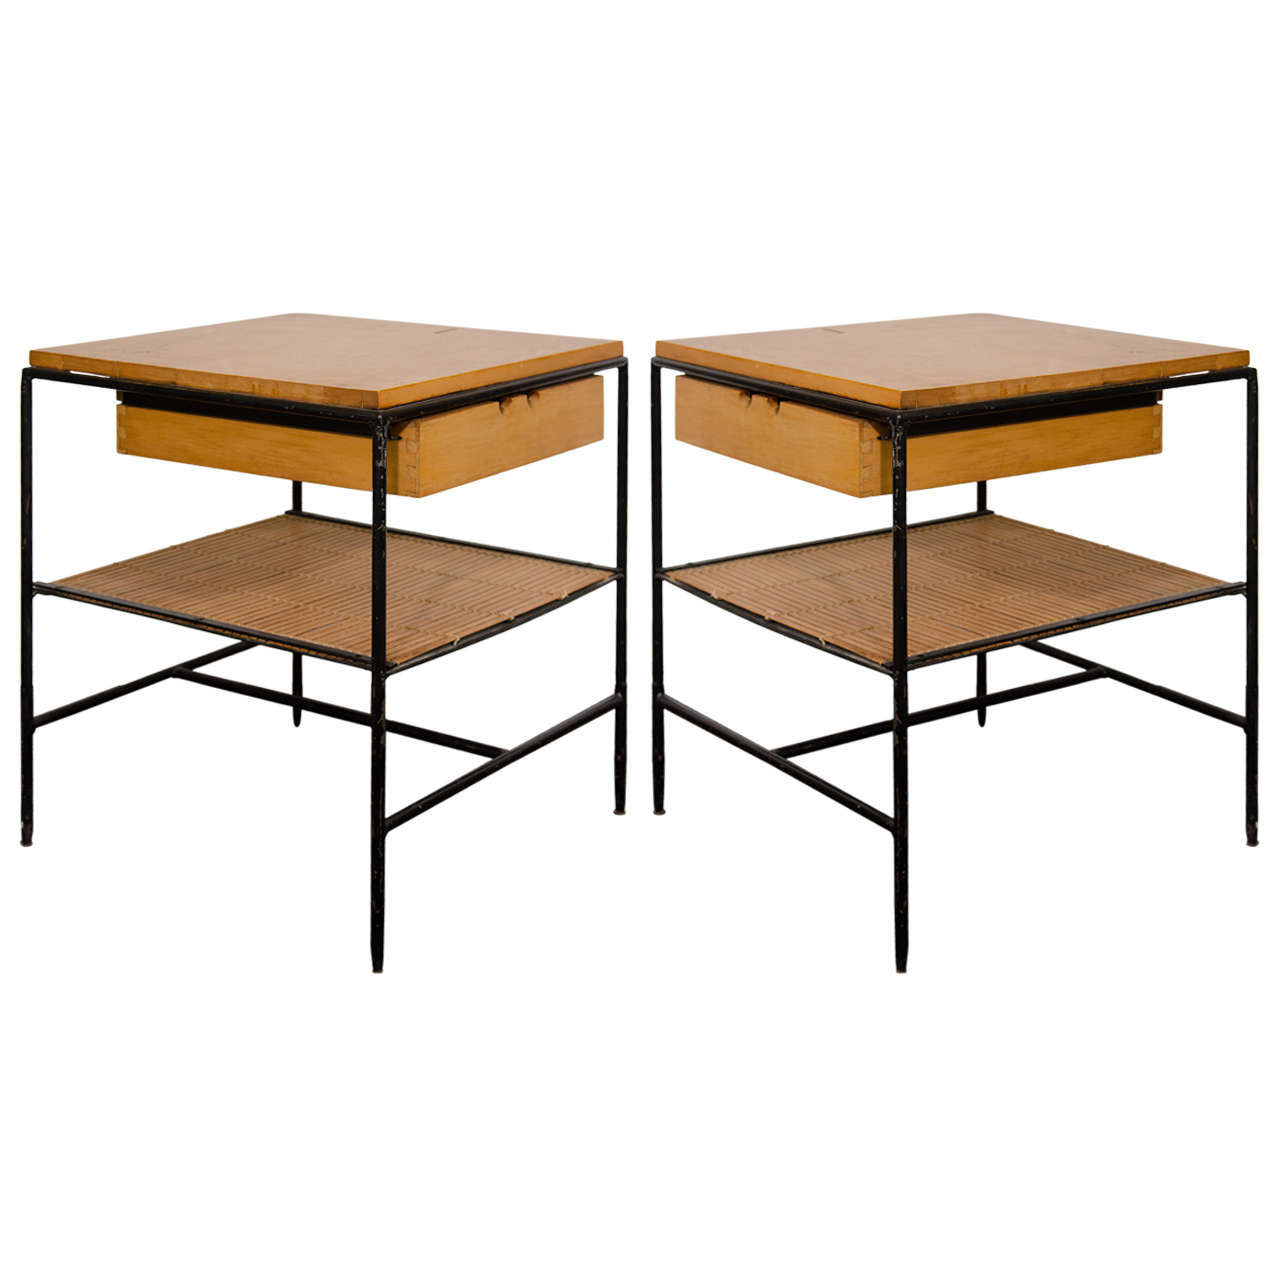 Midcentury Pair of End Tables by Paul McCobb